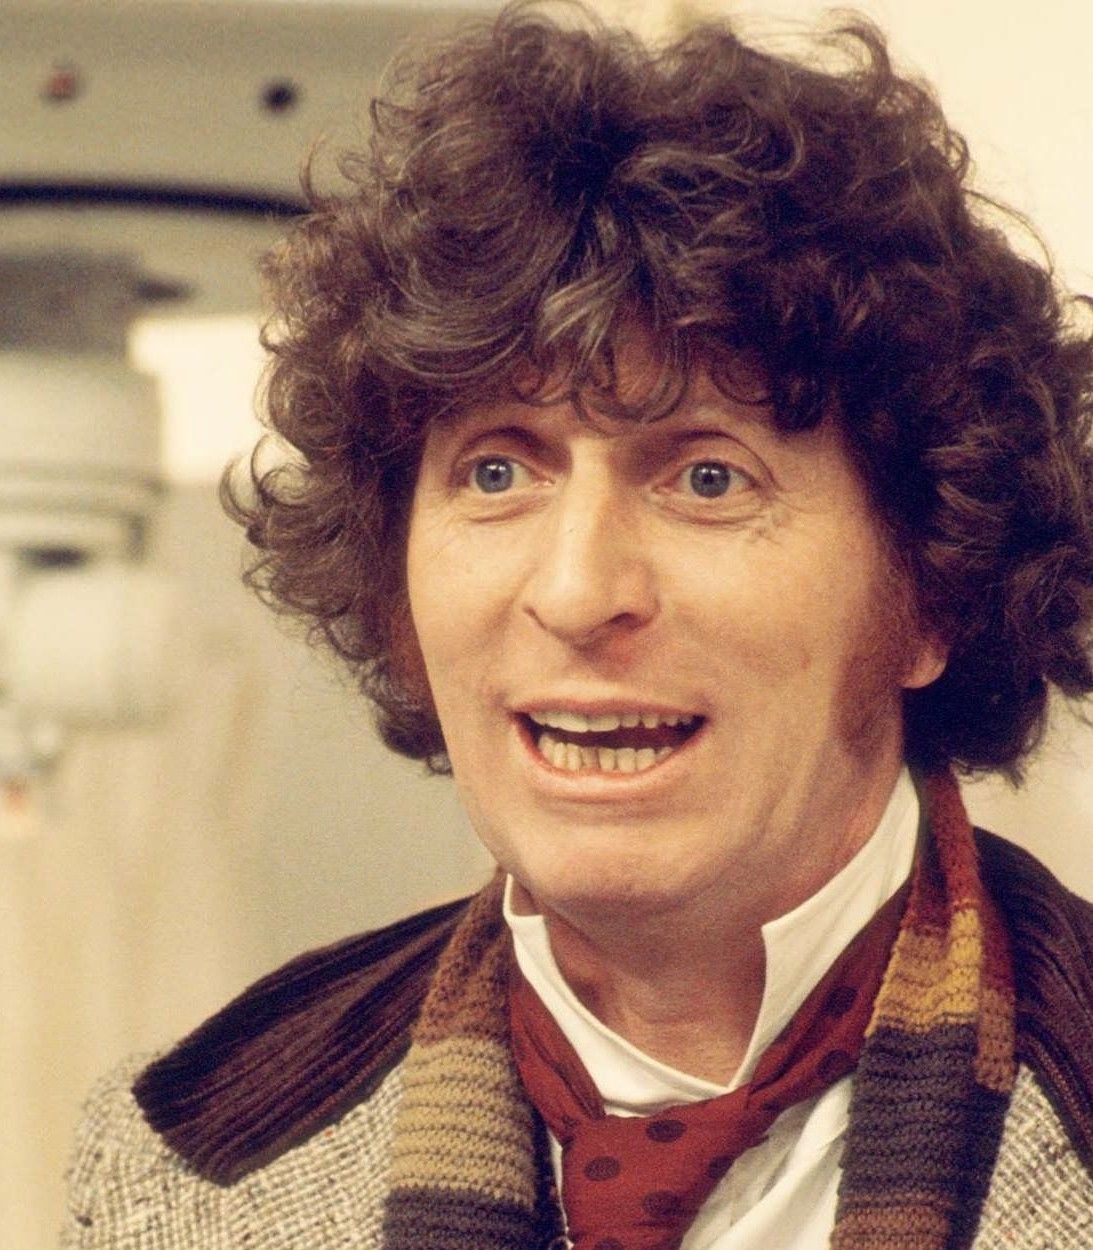 Tom Baker as Fourth Doctor in Doctor Who vertical